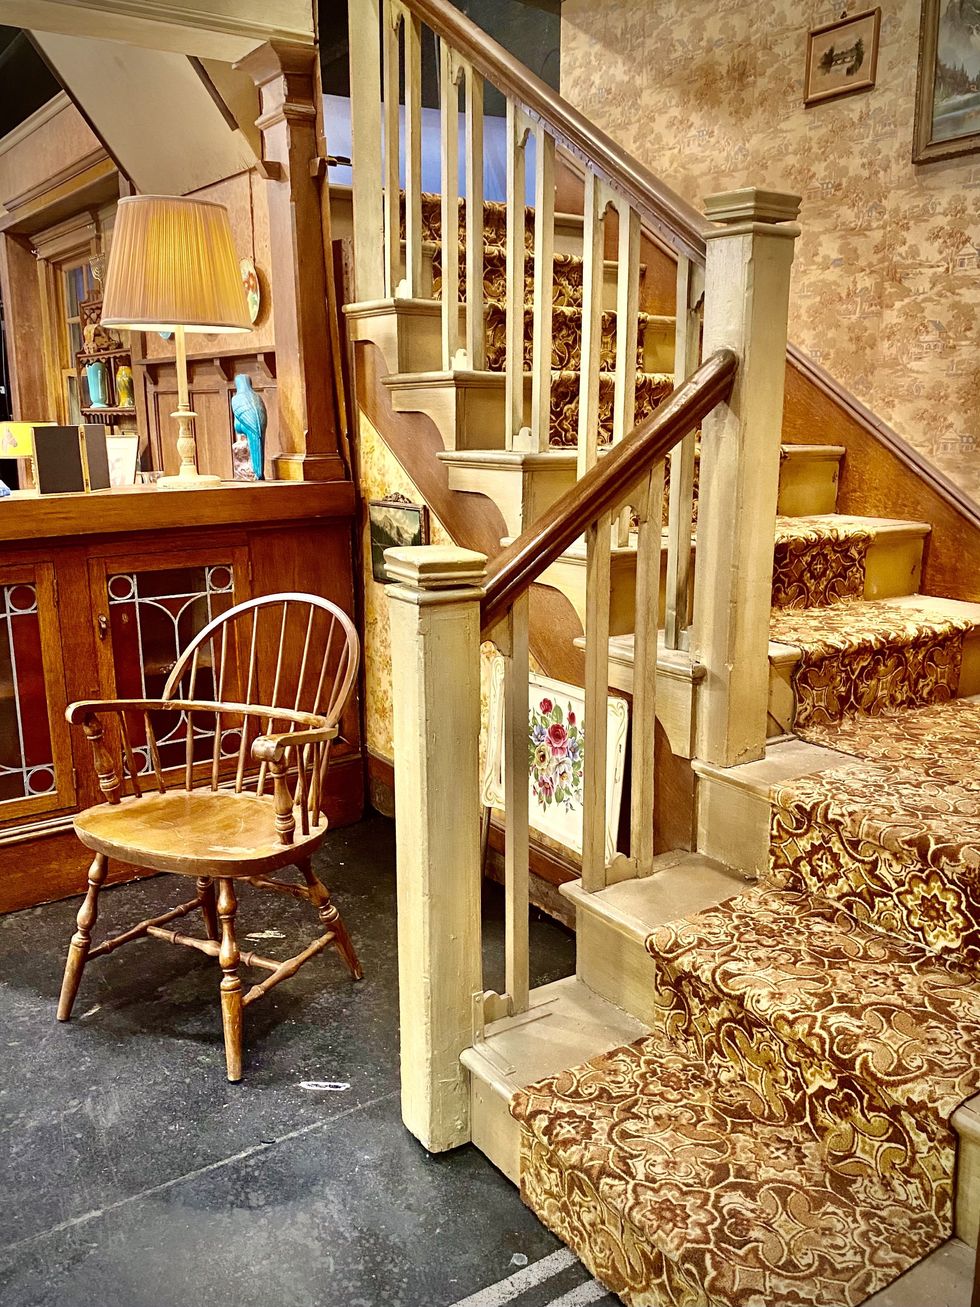 'All In The Family's' living room and staircase set.